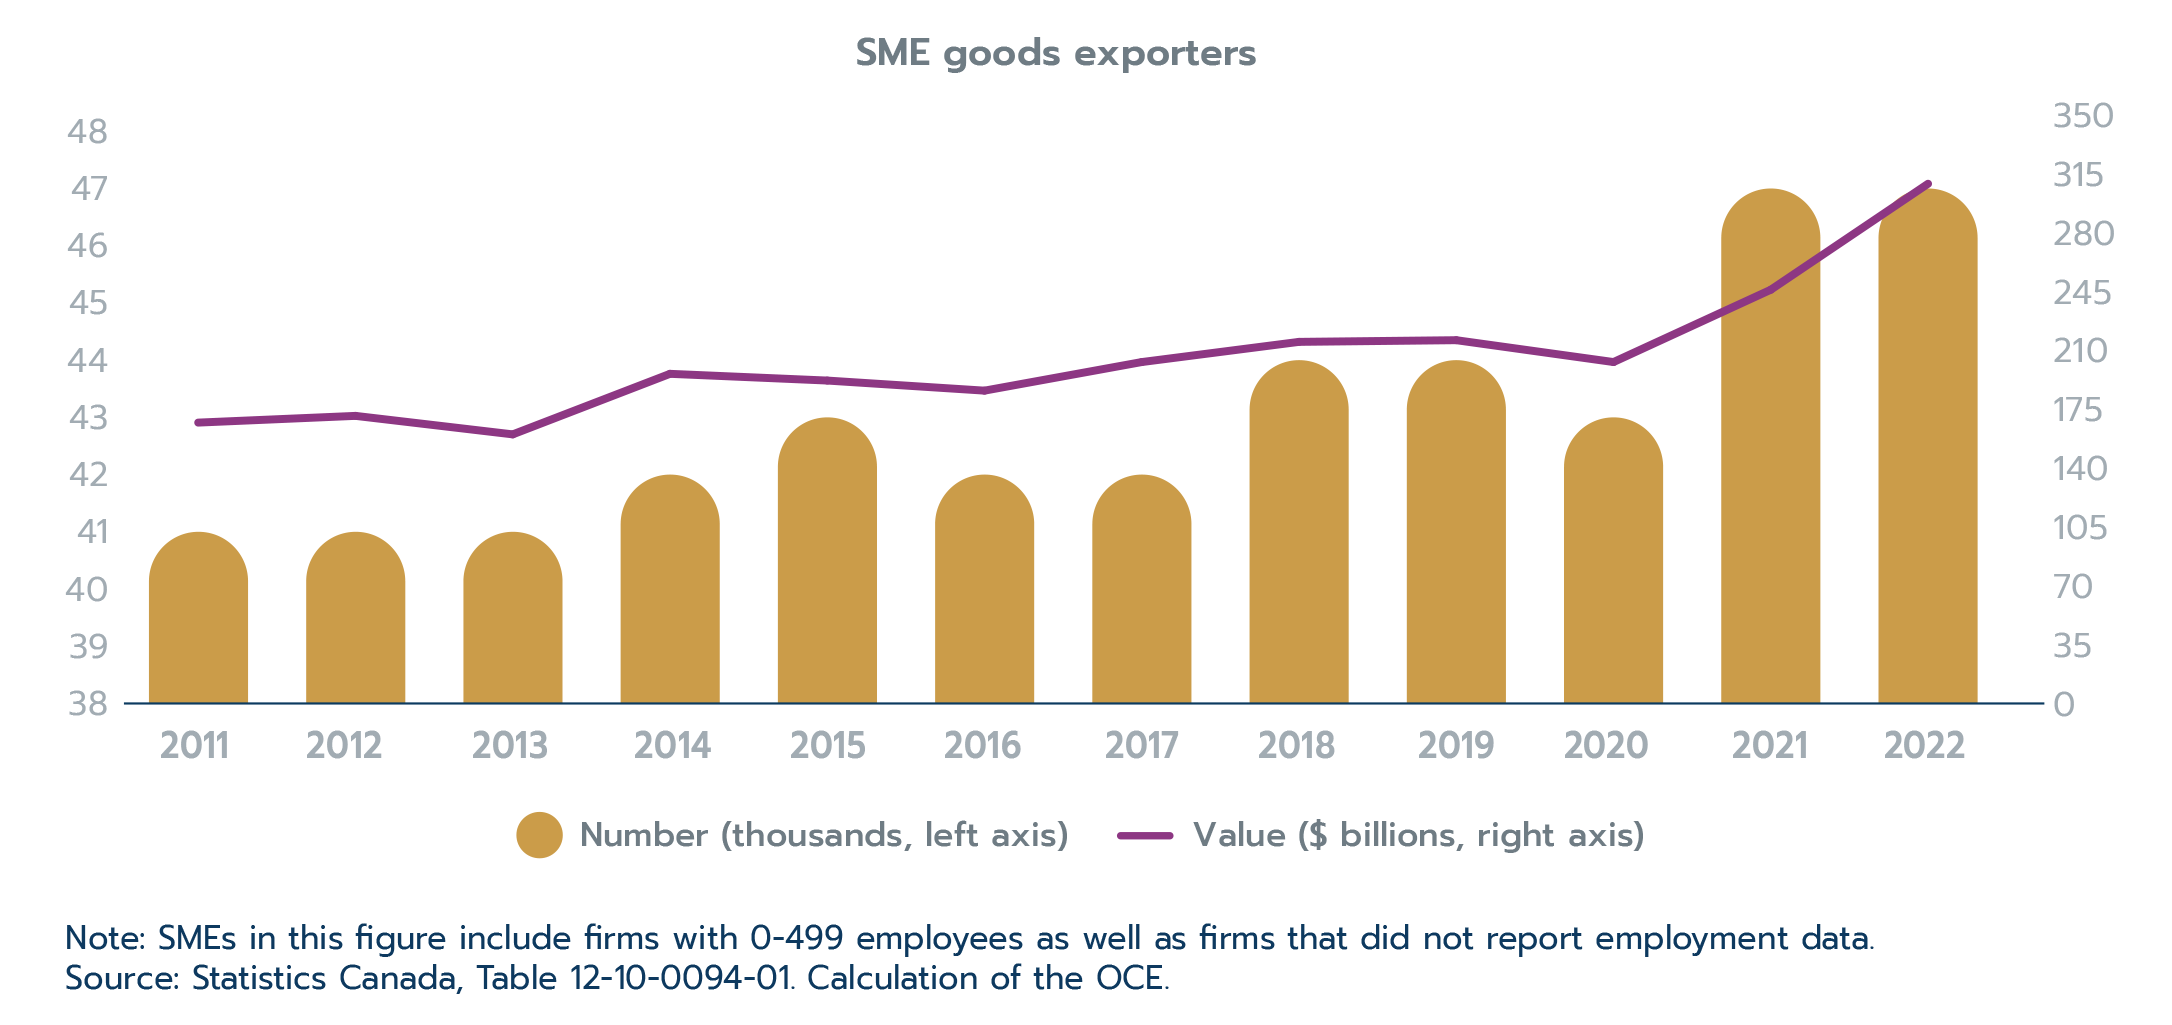 Figure 2.11: Canada’s SME goods exporters recover post-pandemic